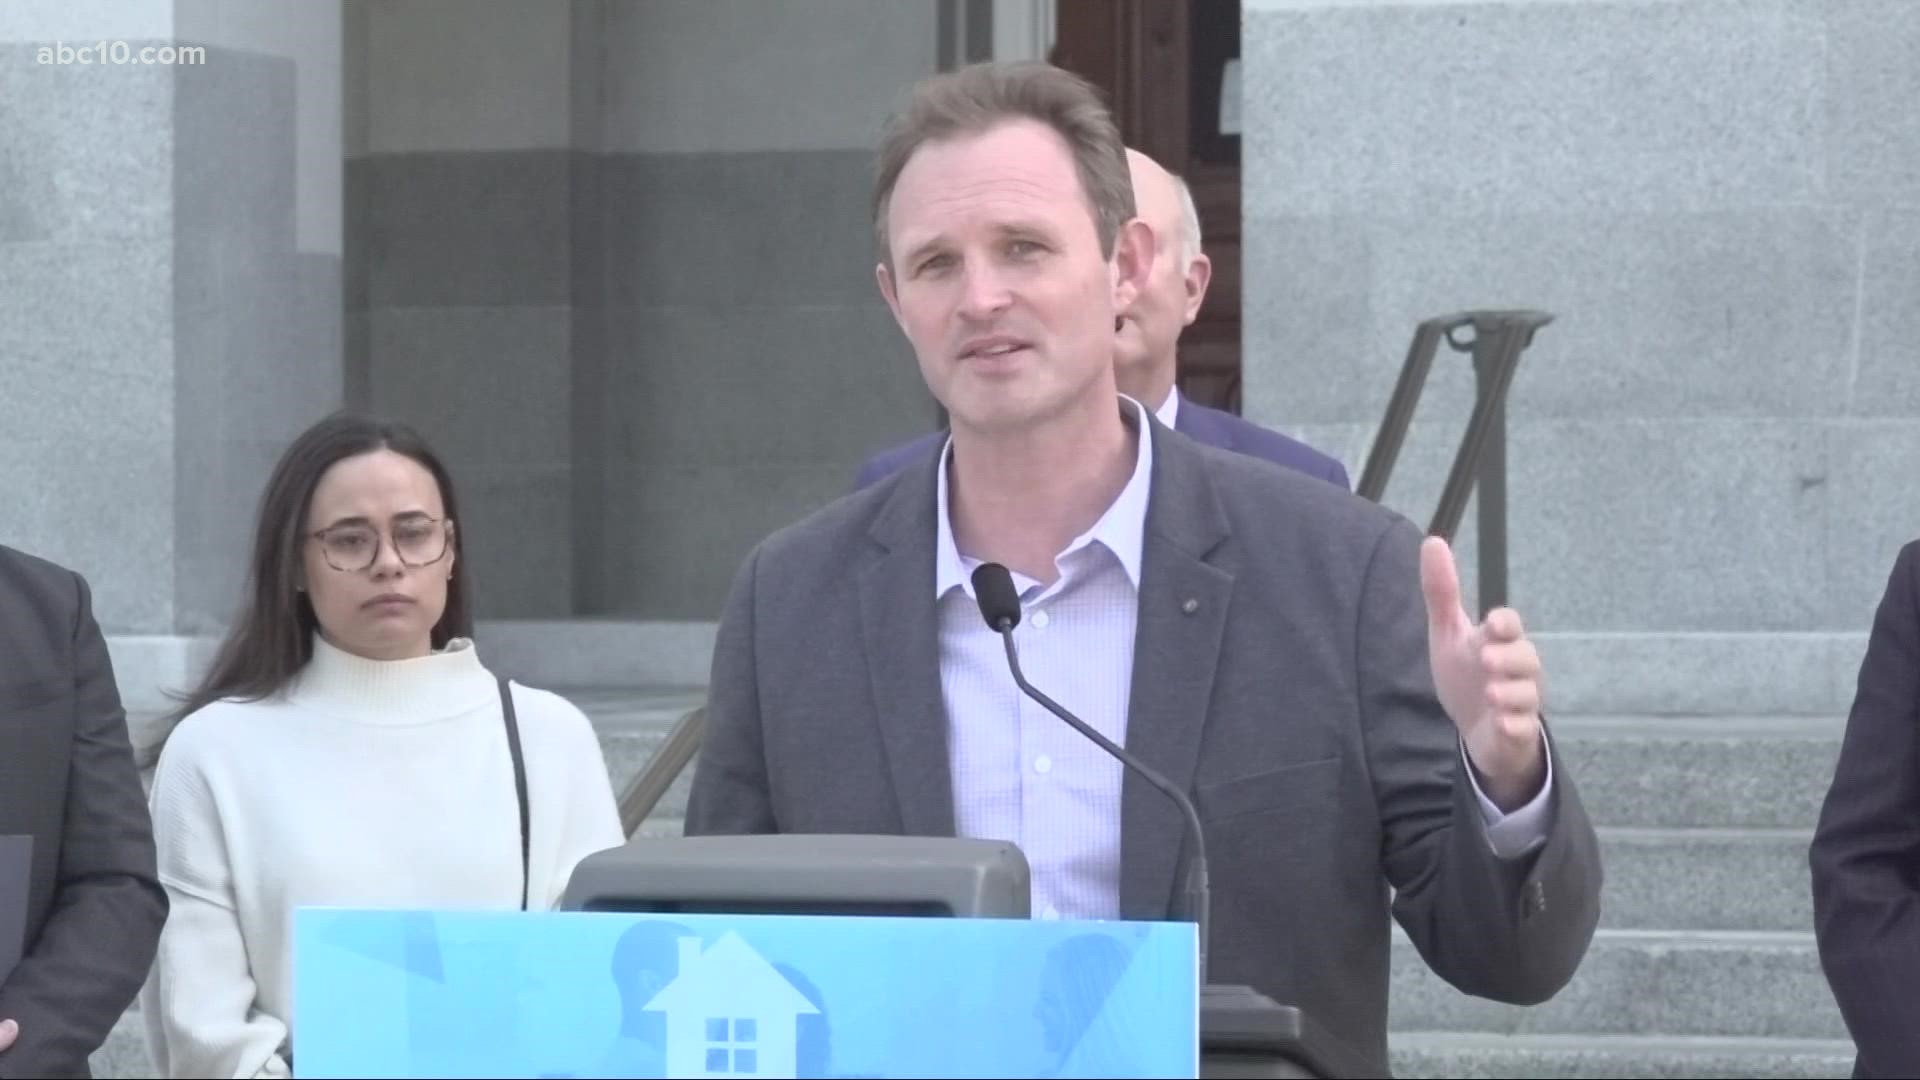 Both Republican and Democrat lawmakers took to the steps of the Capitol Tuesday. They said homeownership provides economic stability and creates generational wealth.